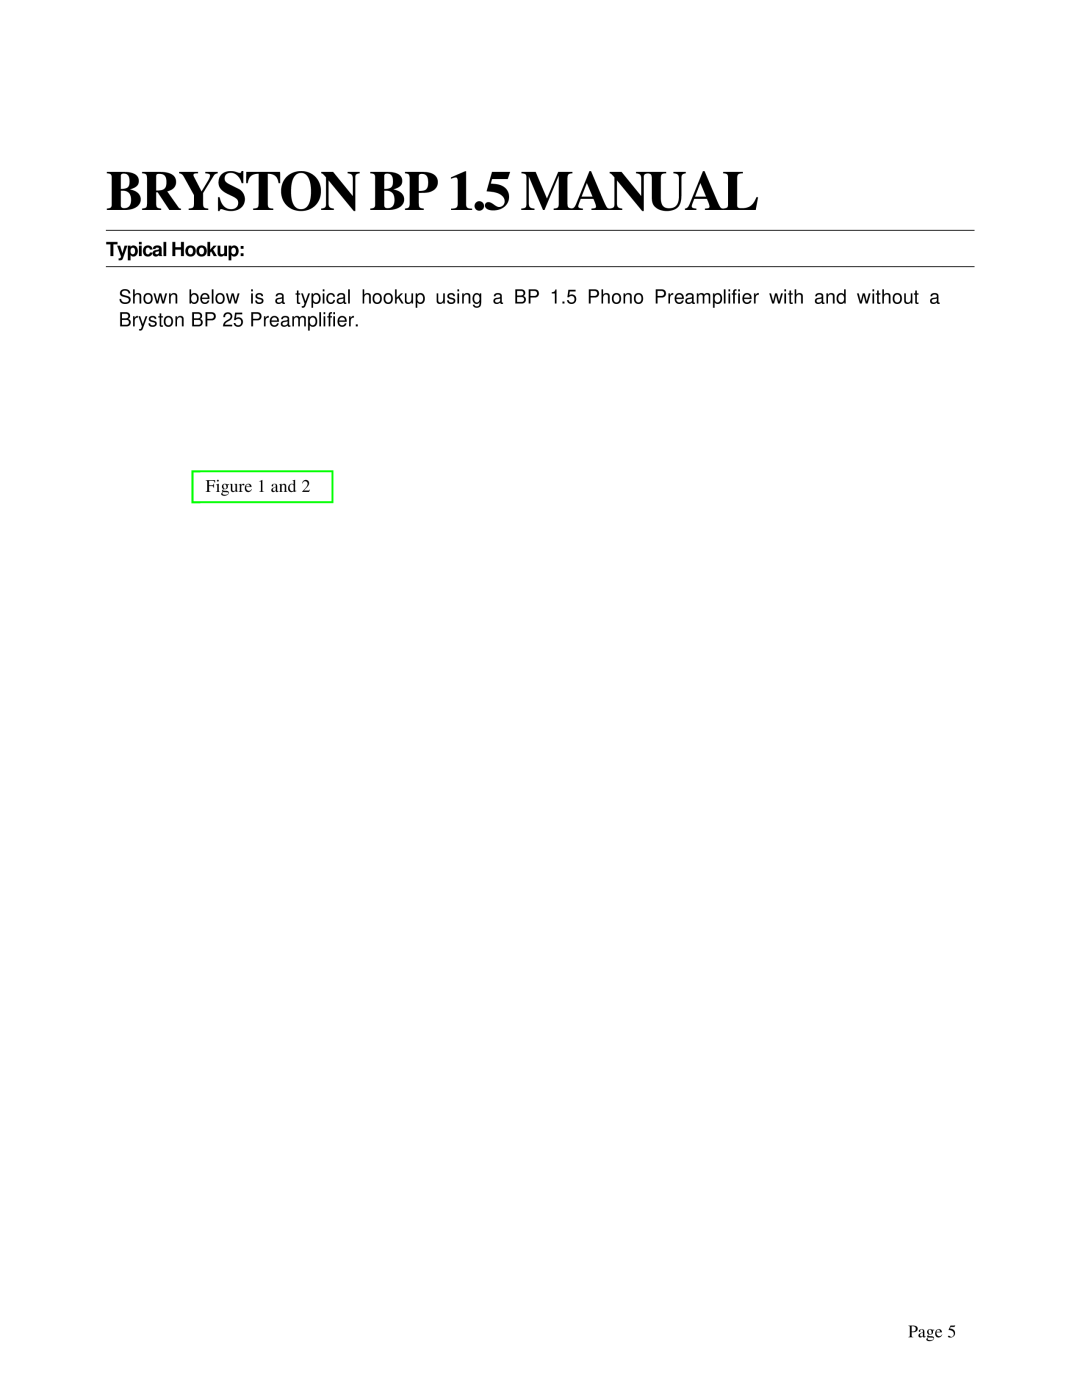 Bryston owner manual Typical Hookup, BRYSTON BP 1.5 MANUAL, and, Page 